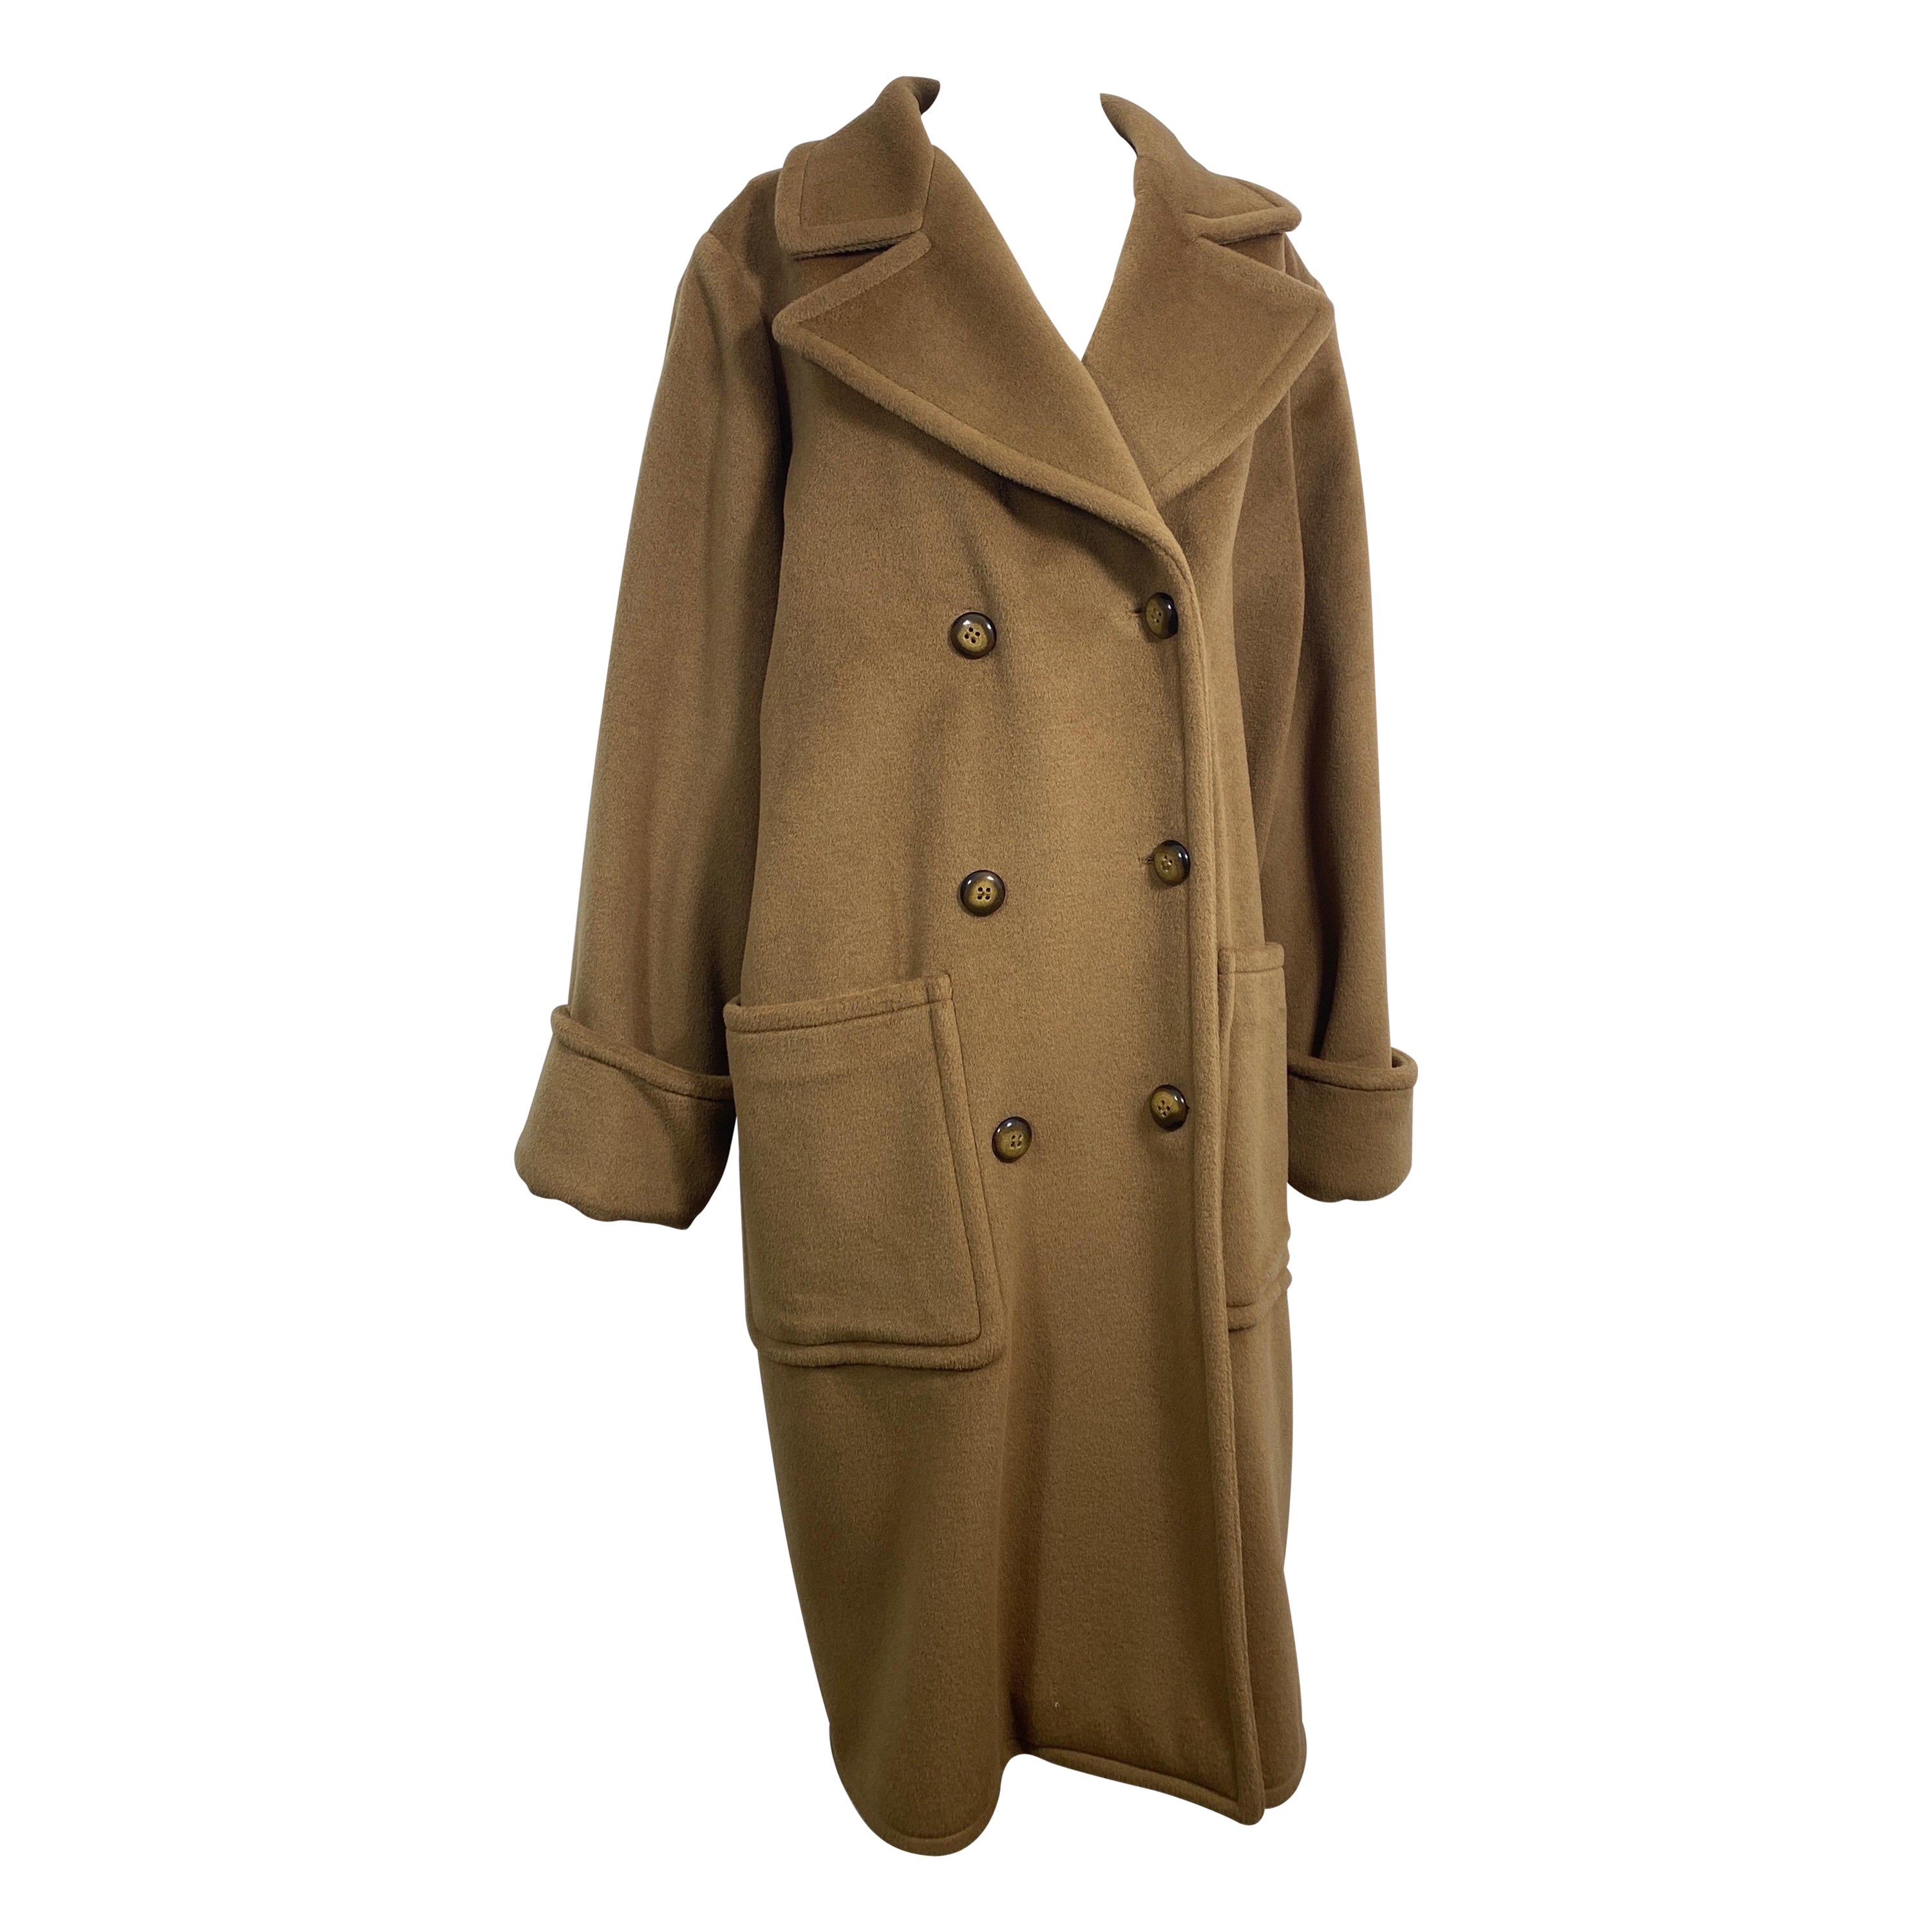 Valentino Boutique 1990’s Double Breasted Tan Cashmere Oversized Coat - Size 10 For Sale